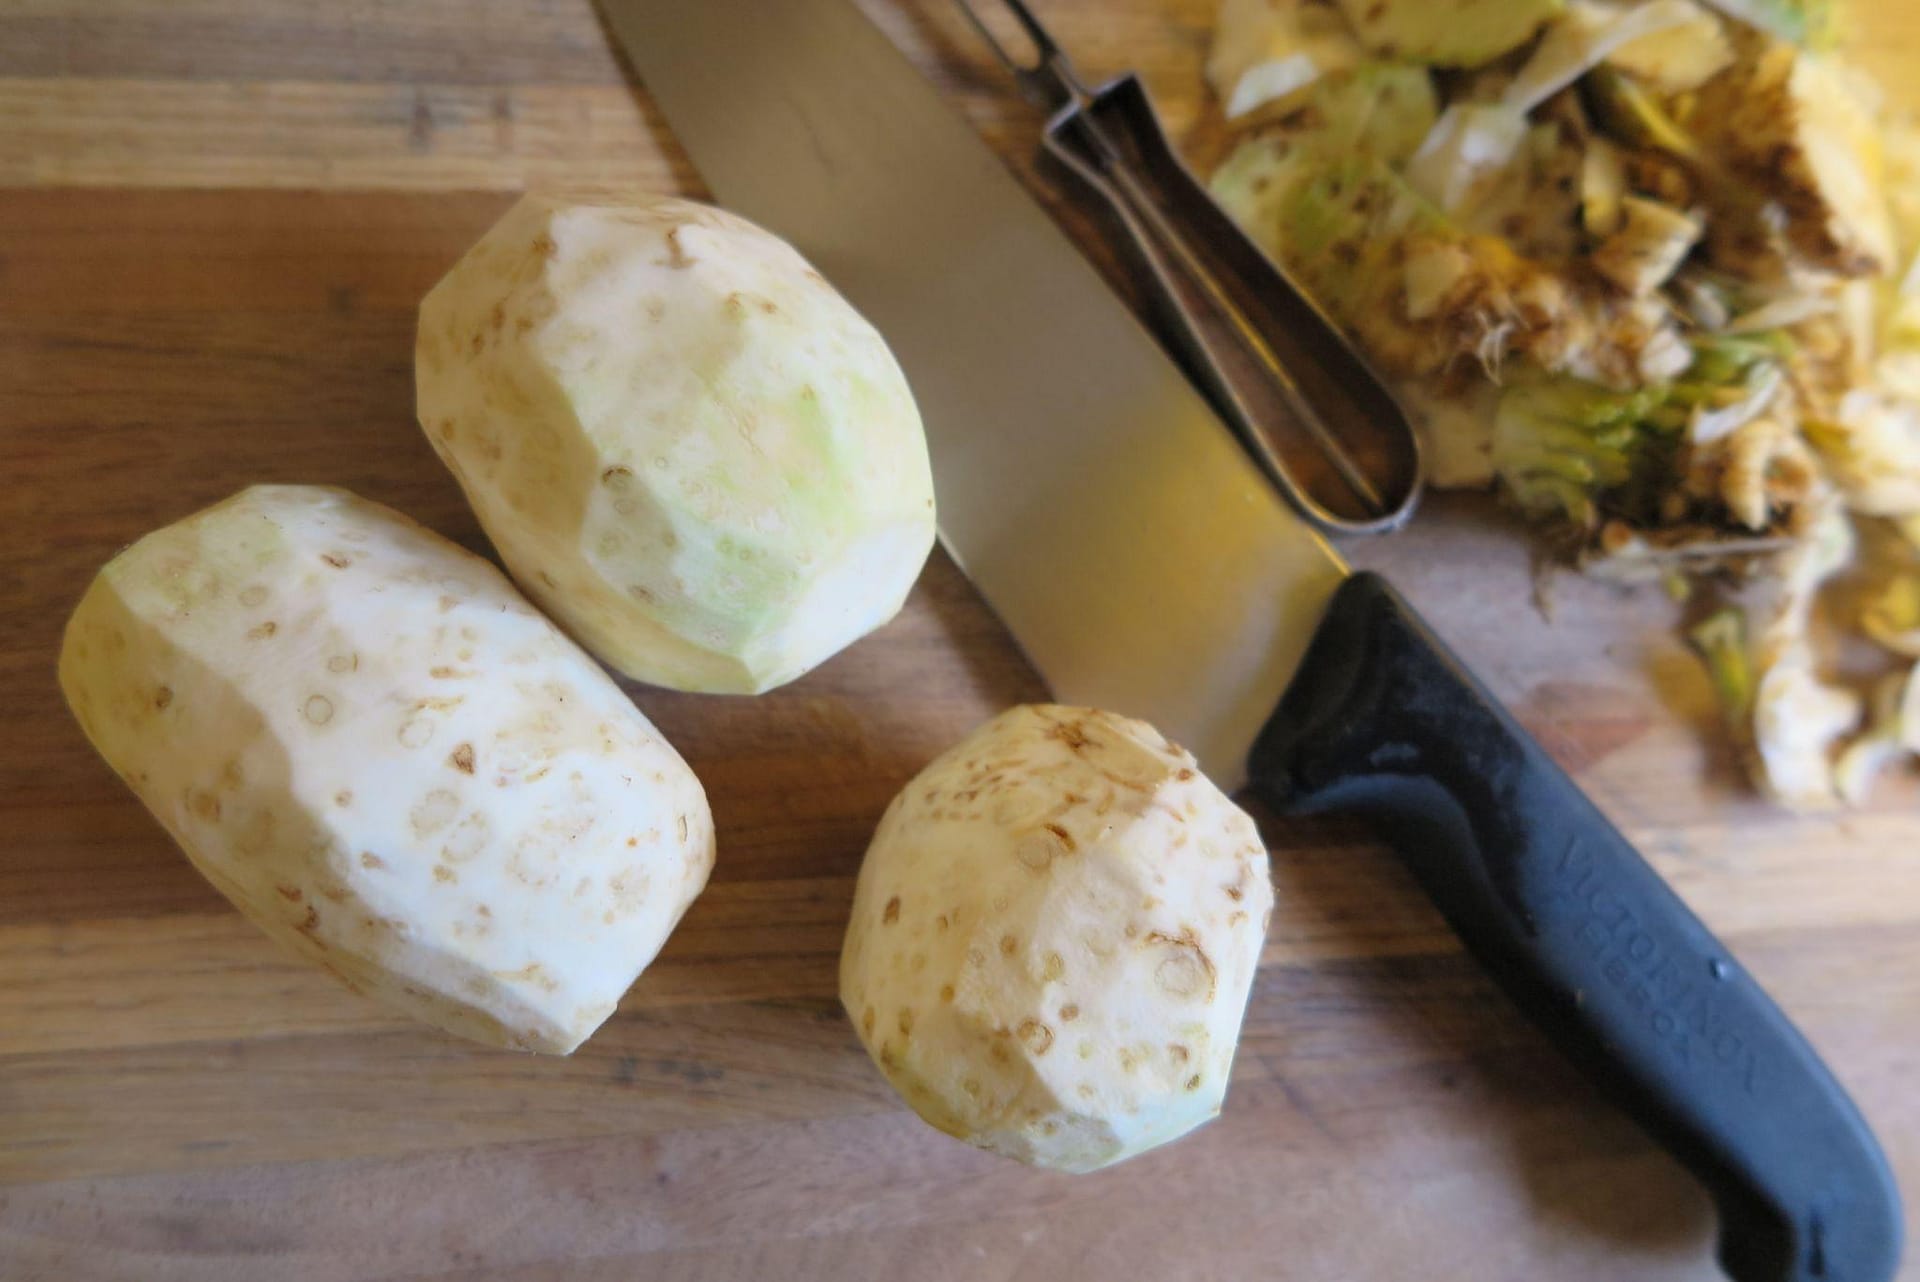 three peeled celeriacs on a cutting board next to a chef's knife and vegetable peeler